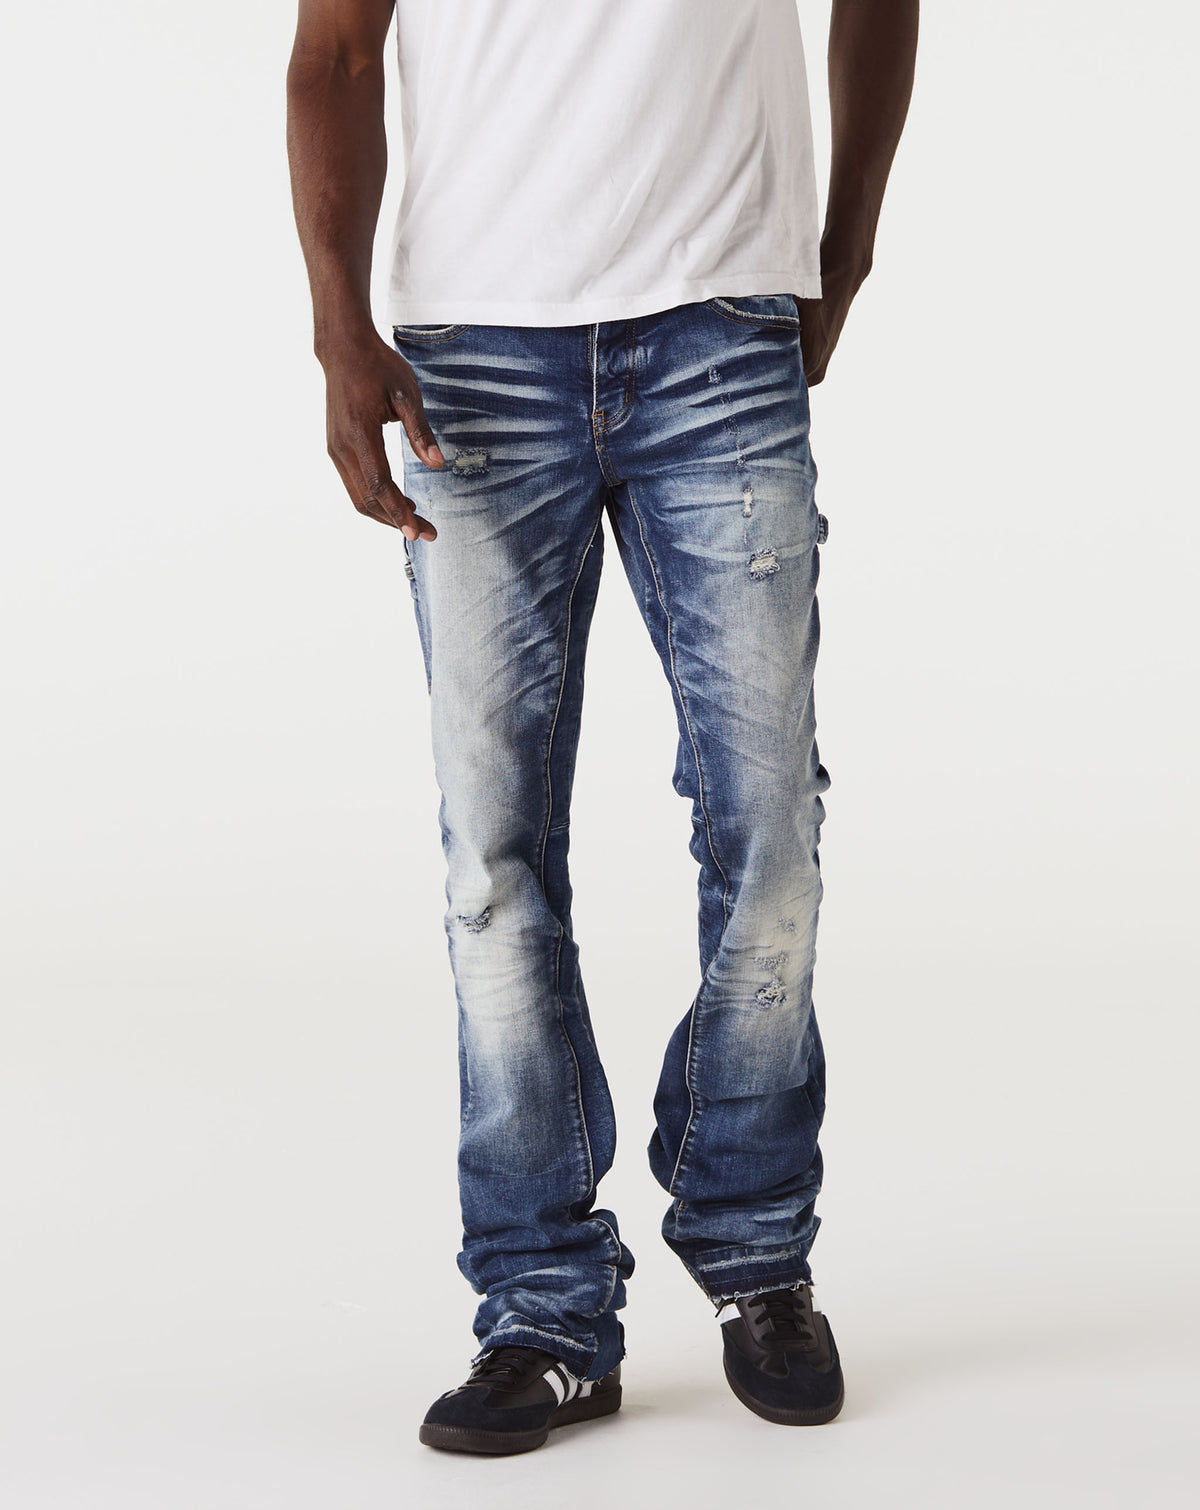 VALABASAS Classified Super Stacked Denim - Rule of Next Apparel